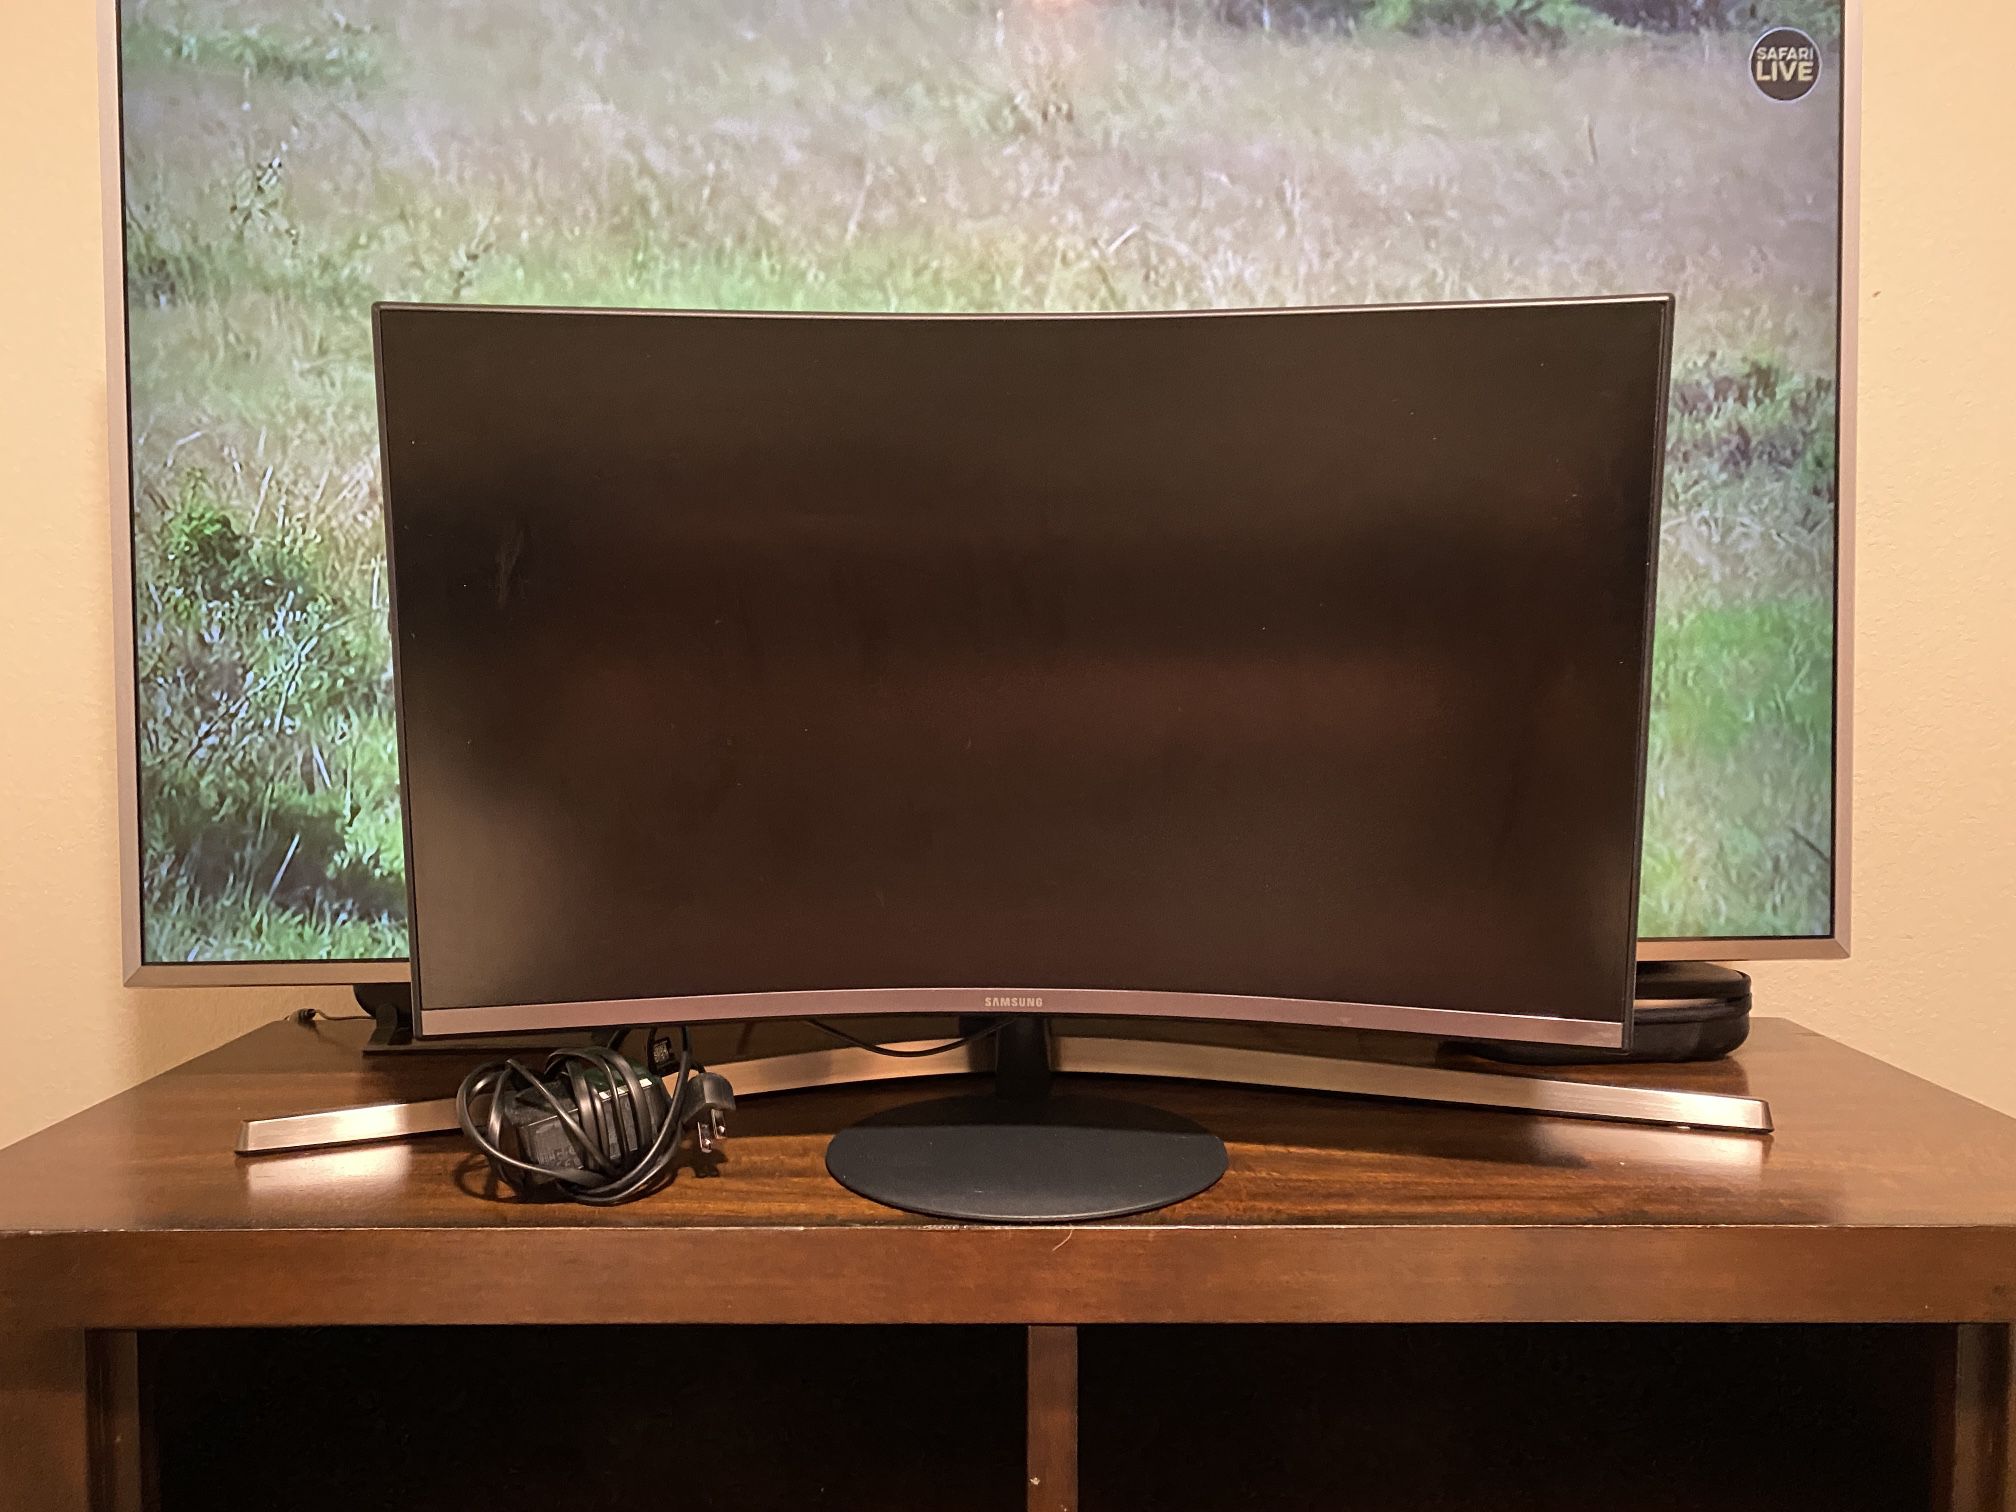 Samsung 28’ Curved Monitor